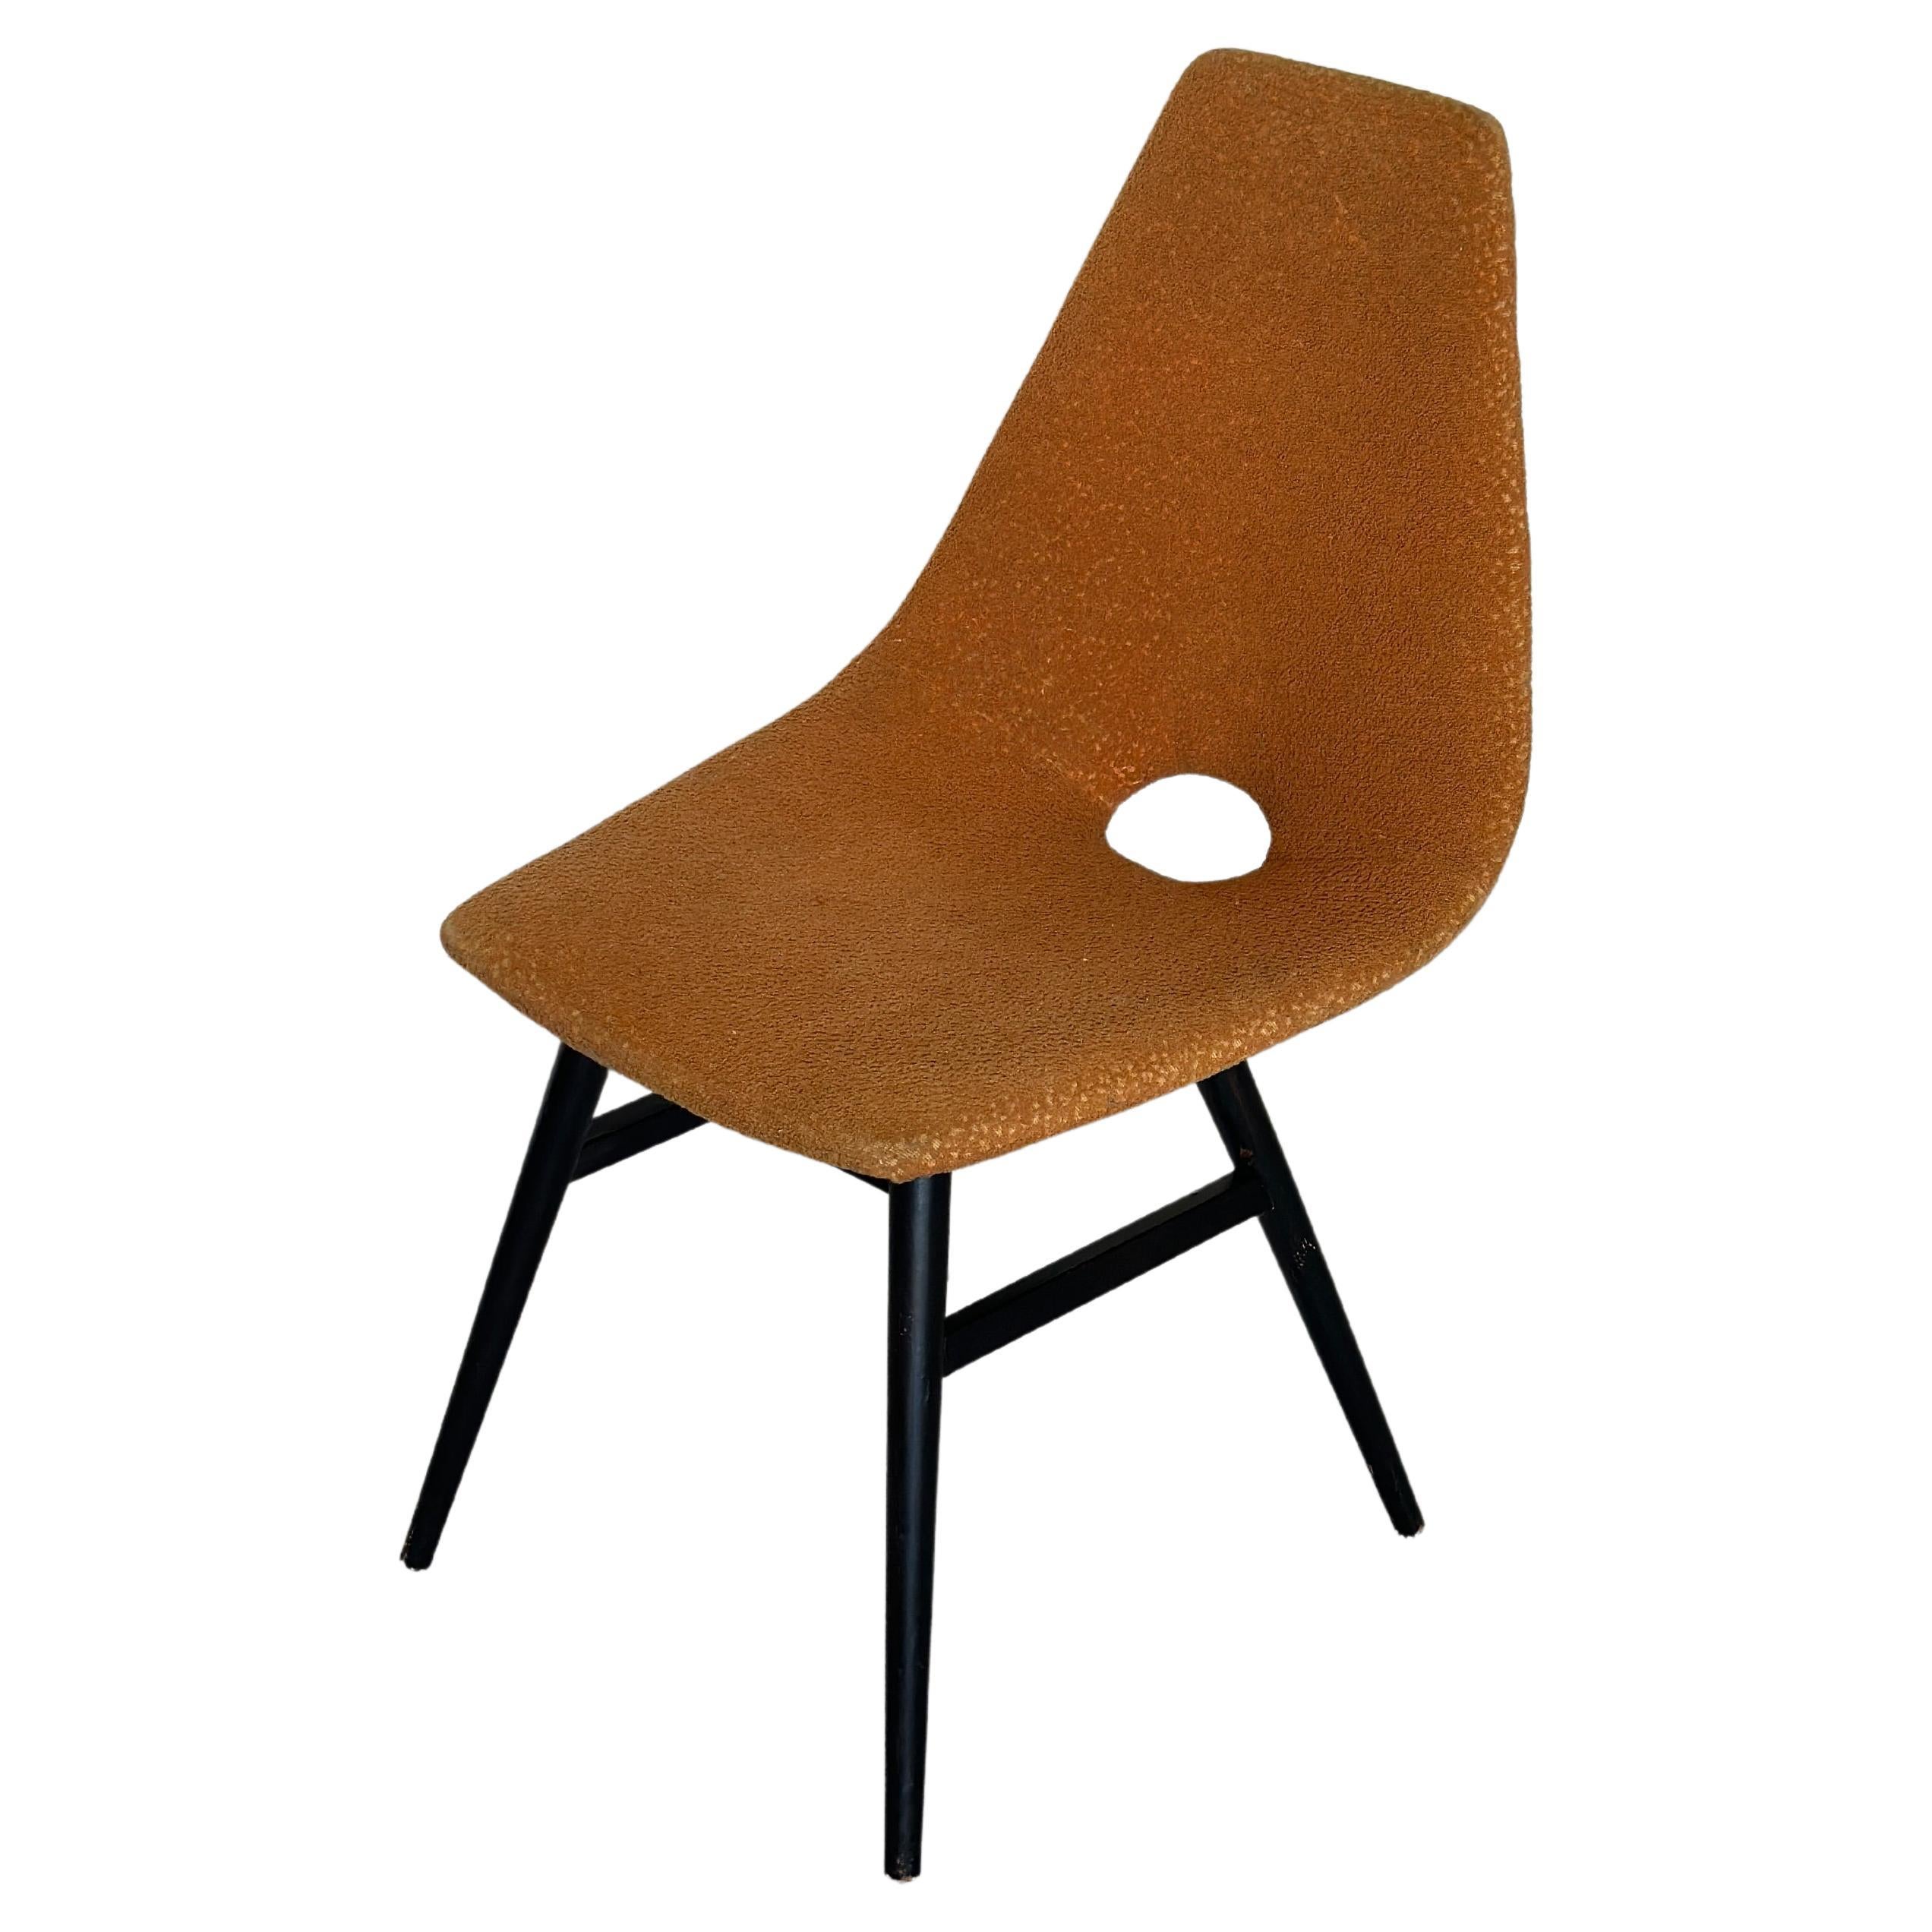 Chair By Judit Burian and Erika Szek 1950s For Sale